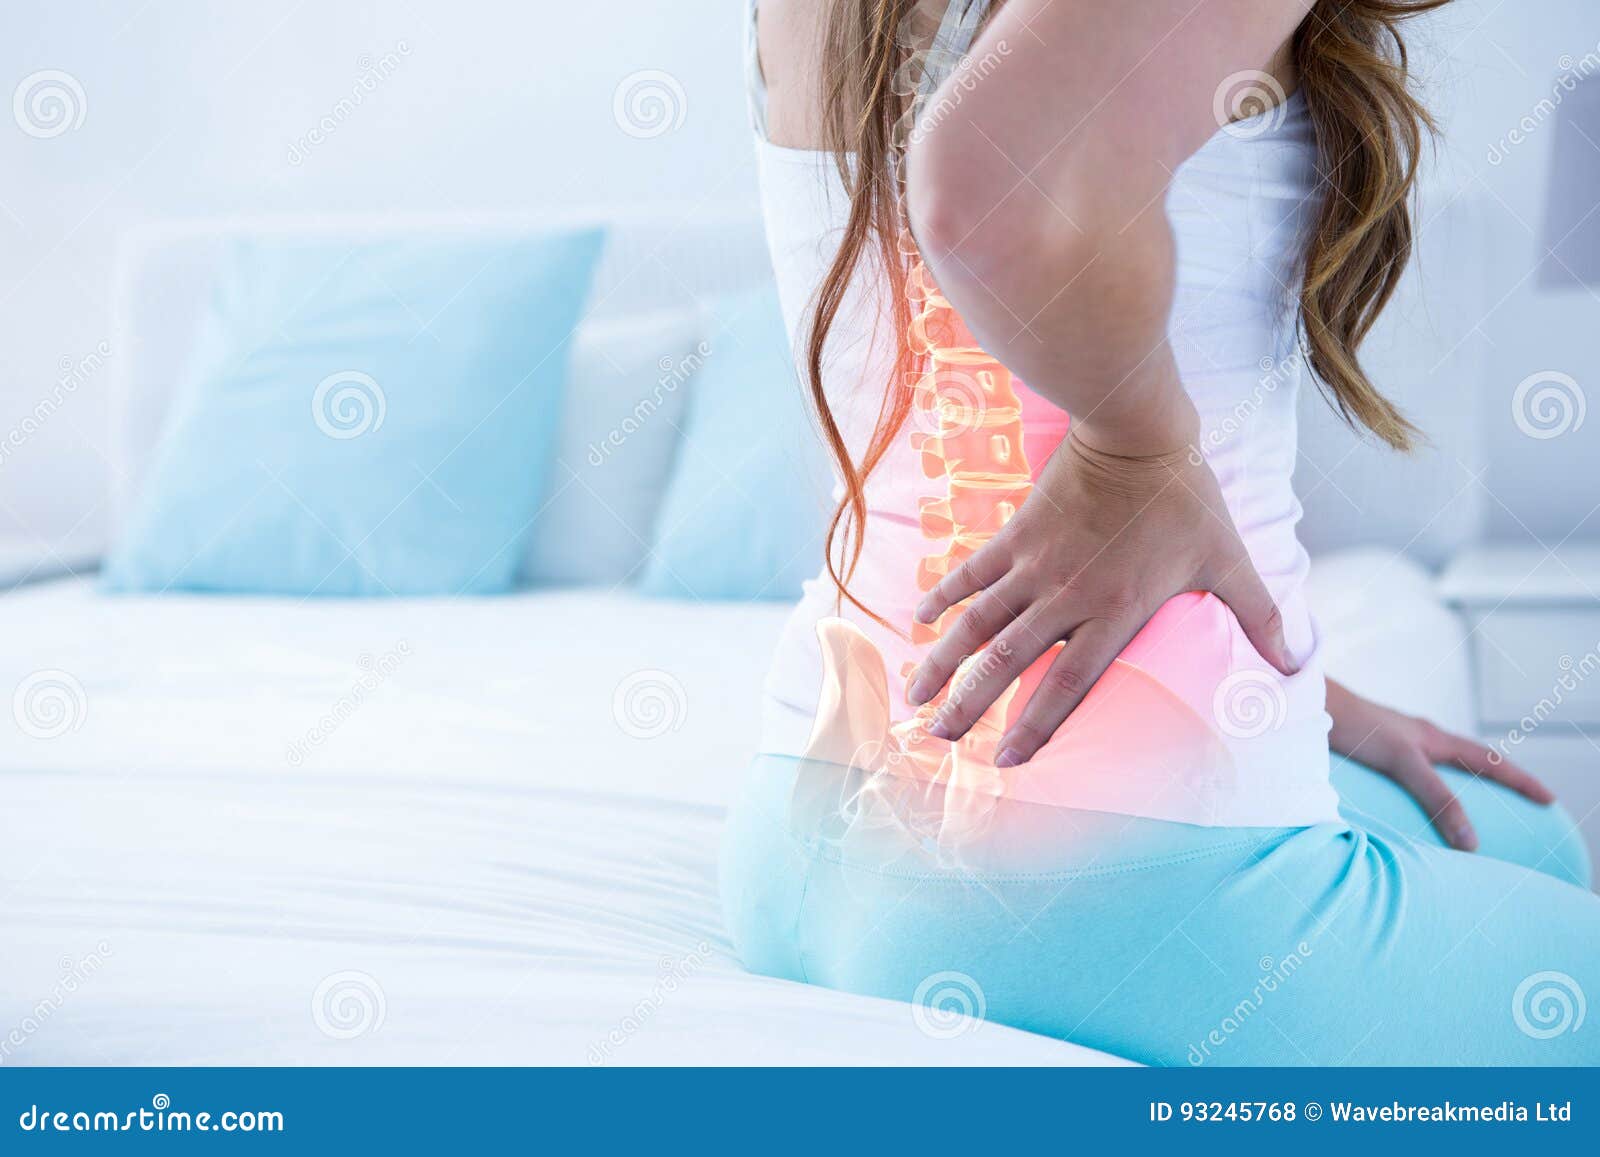 digital composite of highlighted spine of woman with back pain